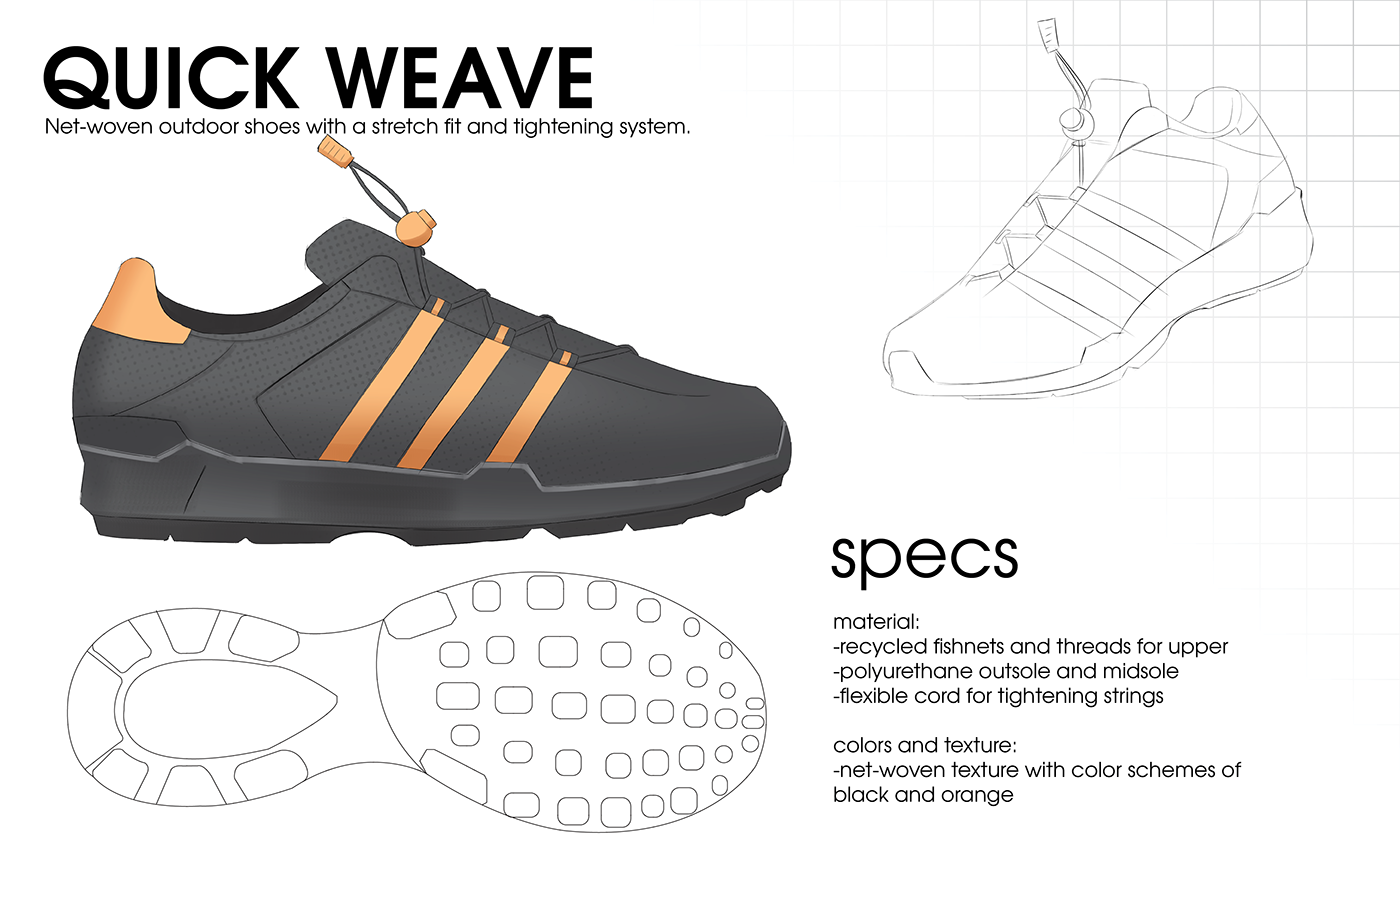 Adidas Eco-friendly Shoe Designs (Project) on Behance